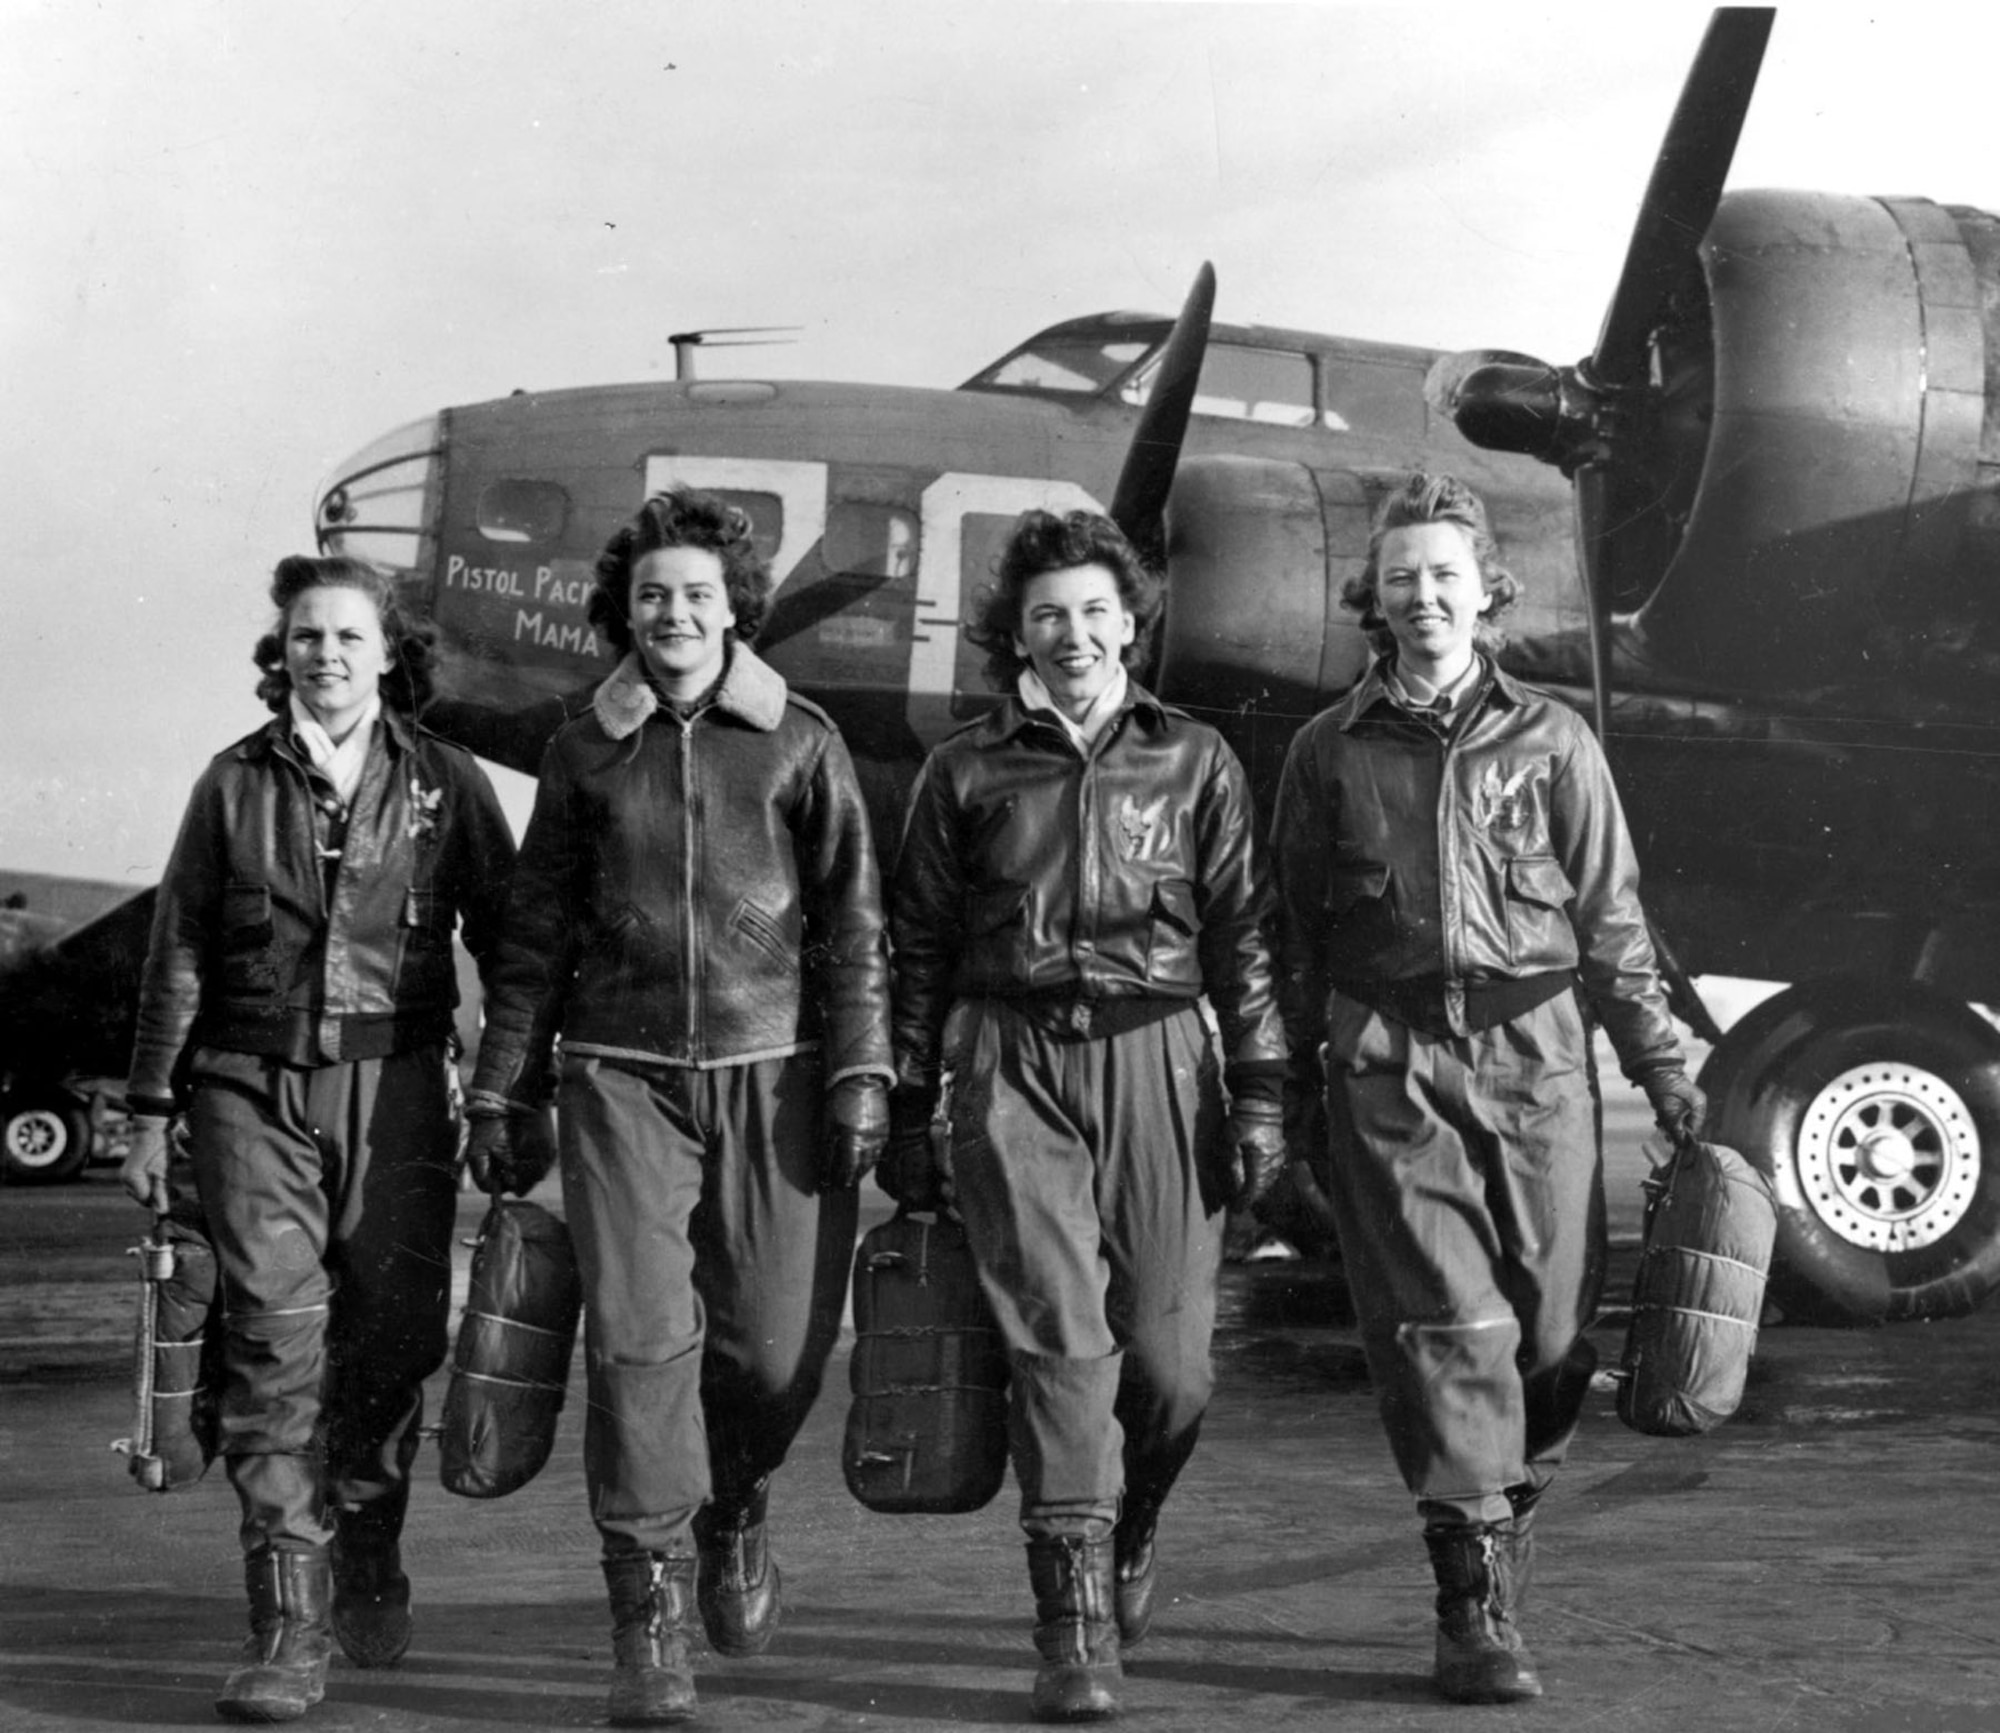 WASP Pilots in front of USAAF B-17 "Pistol Packin Mama." (U.S. Air Force photo)